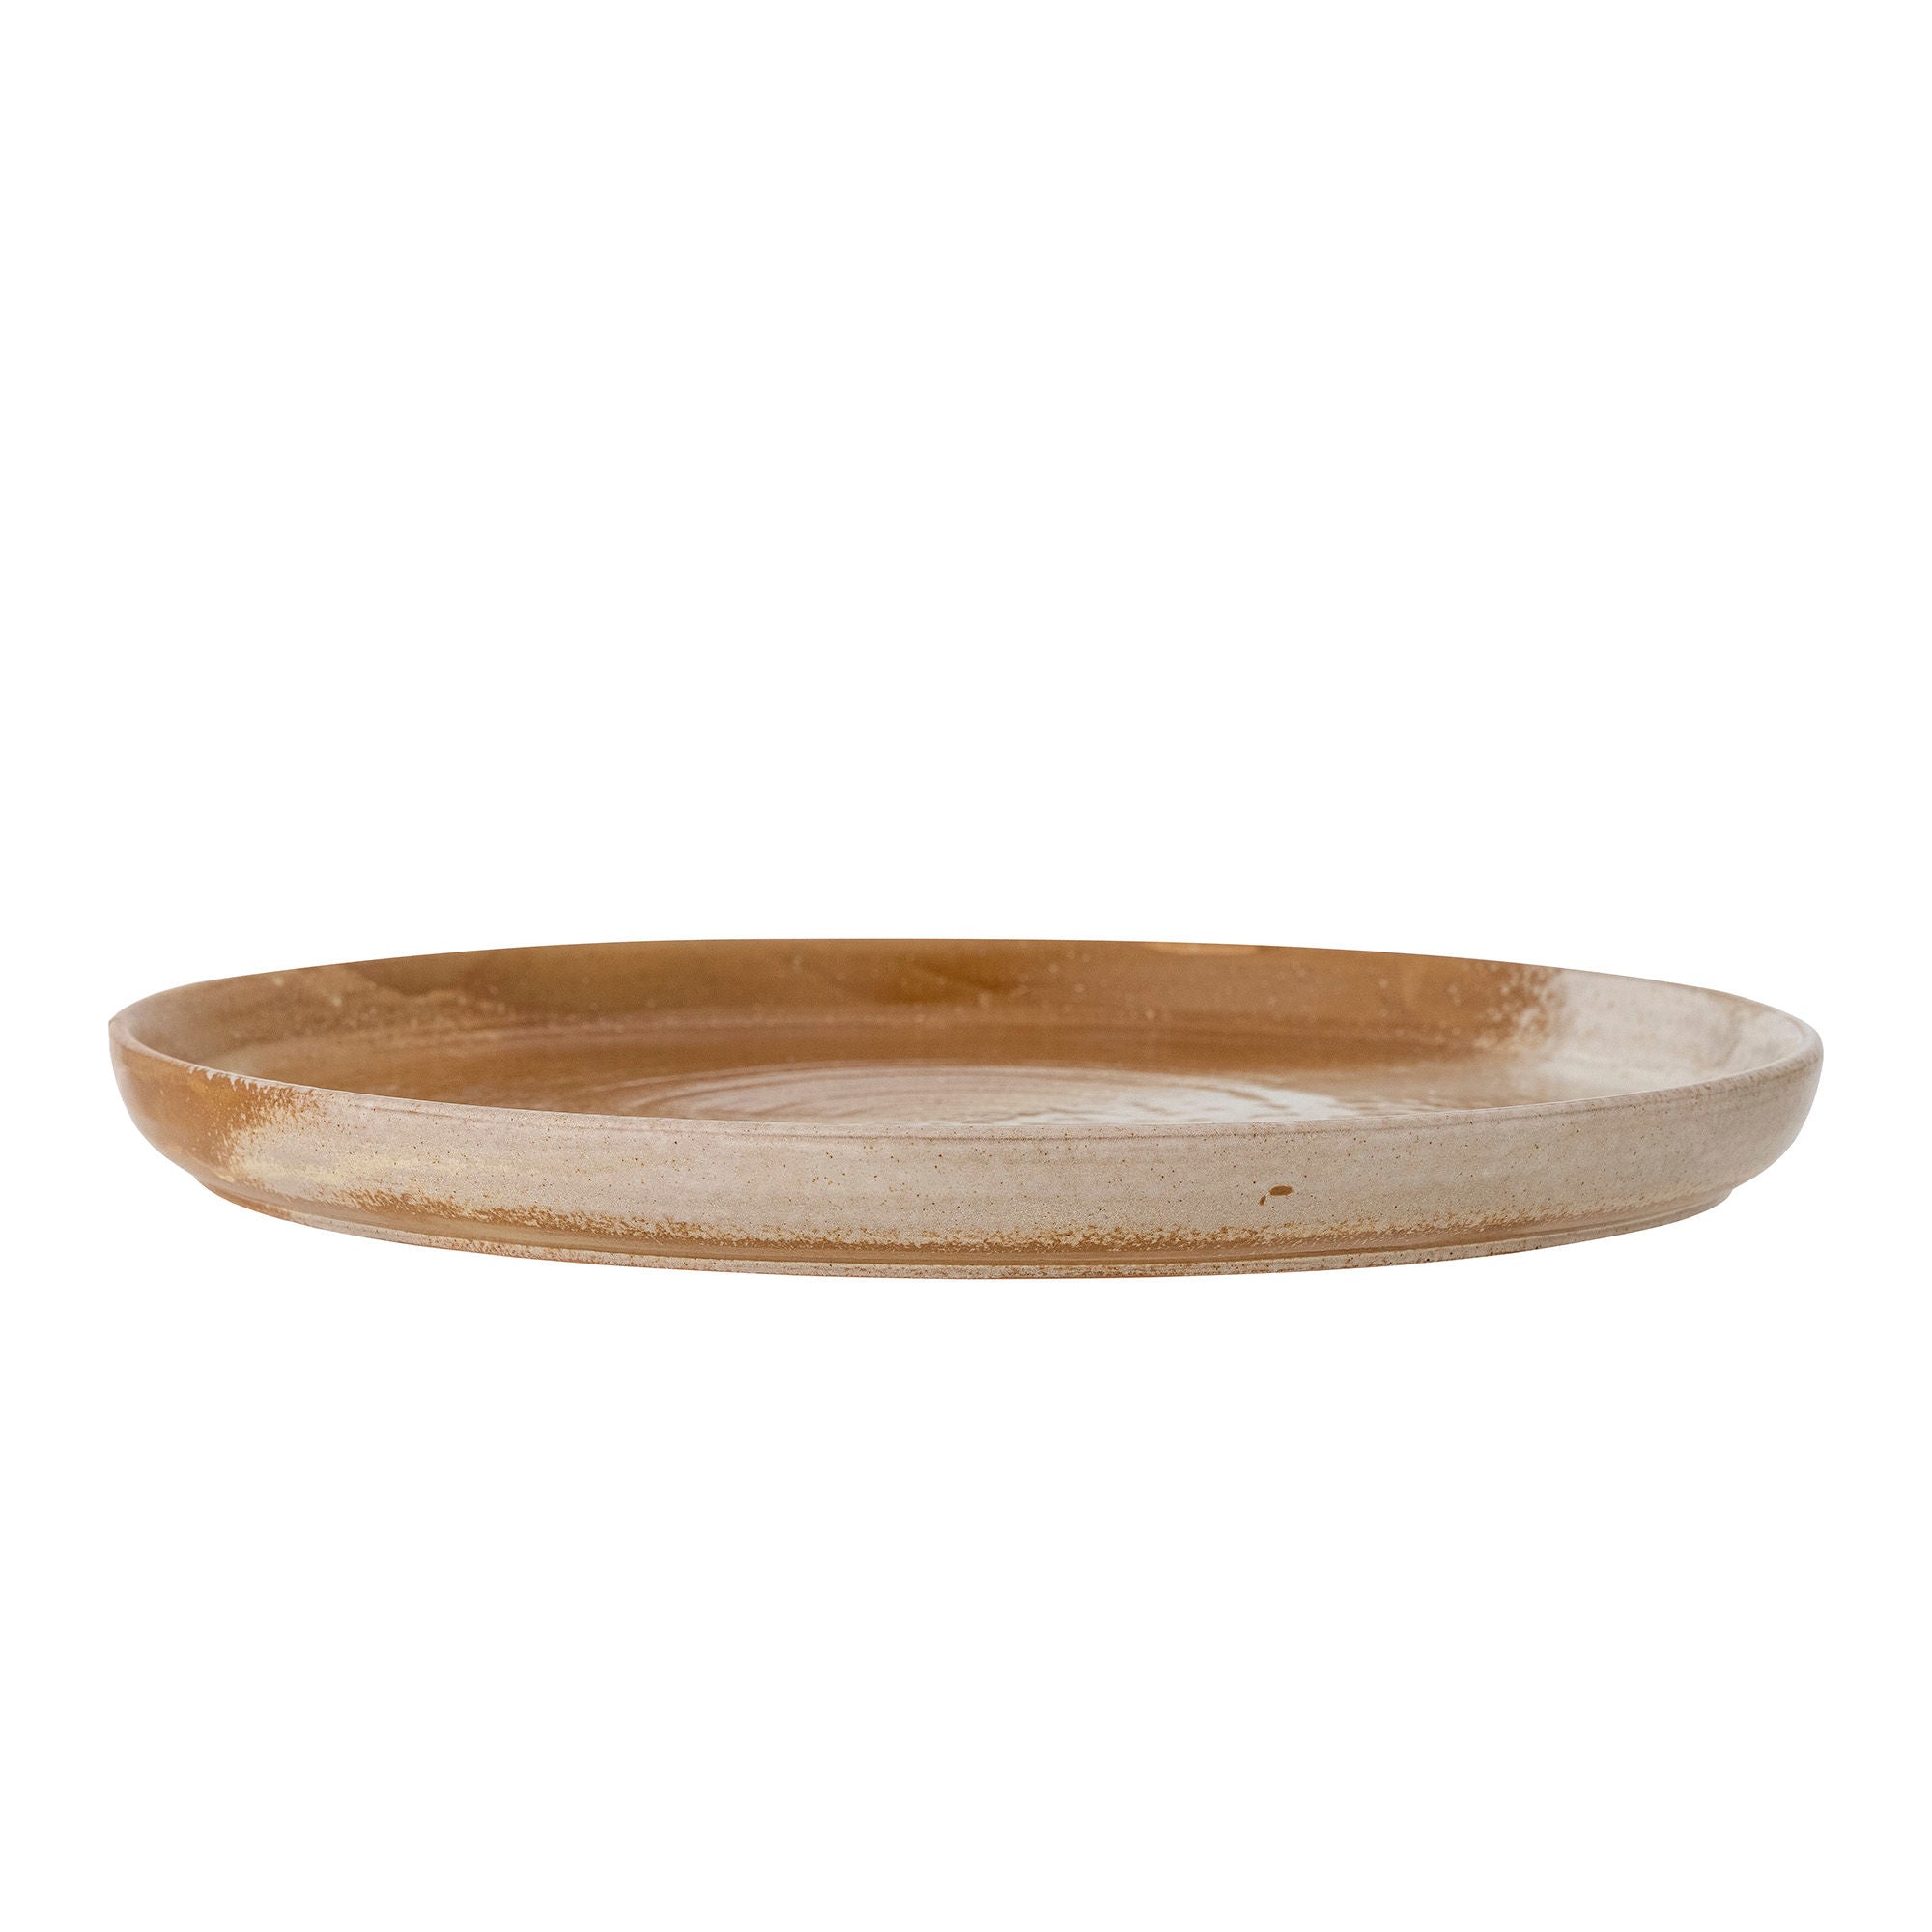 Creative Collection Dahlia Serving Plate, Brown, Stoneware